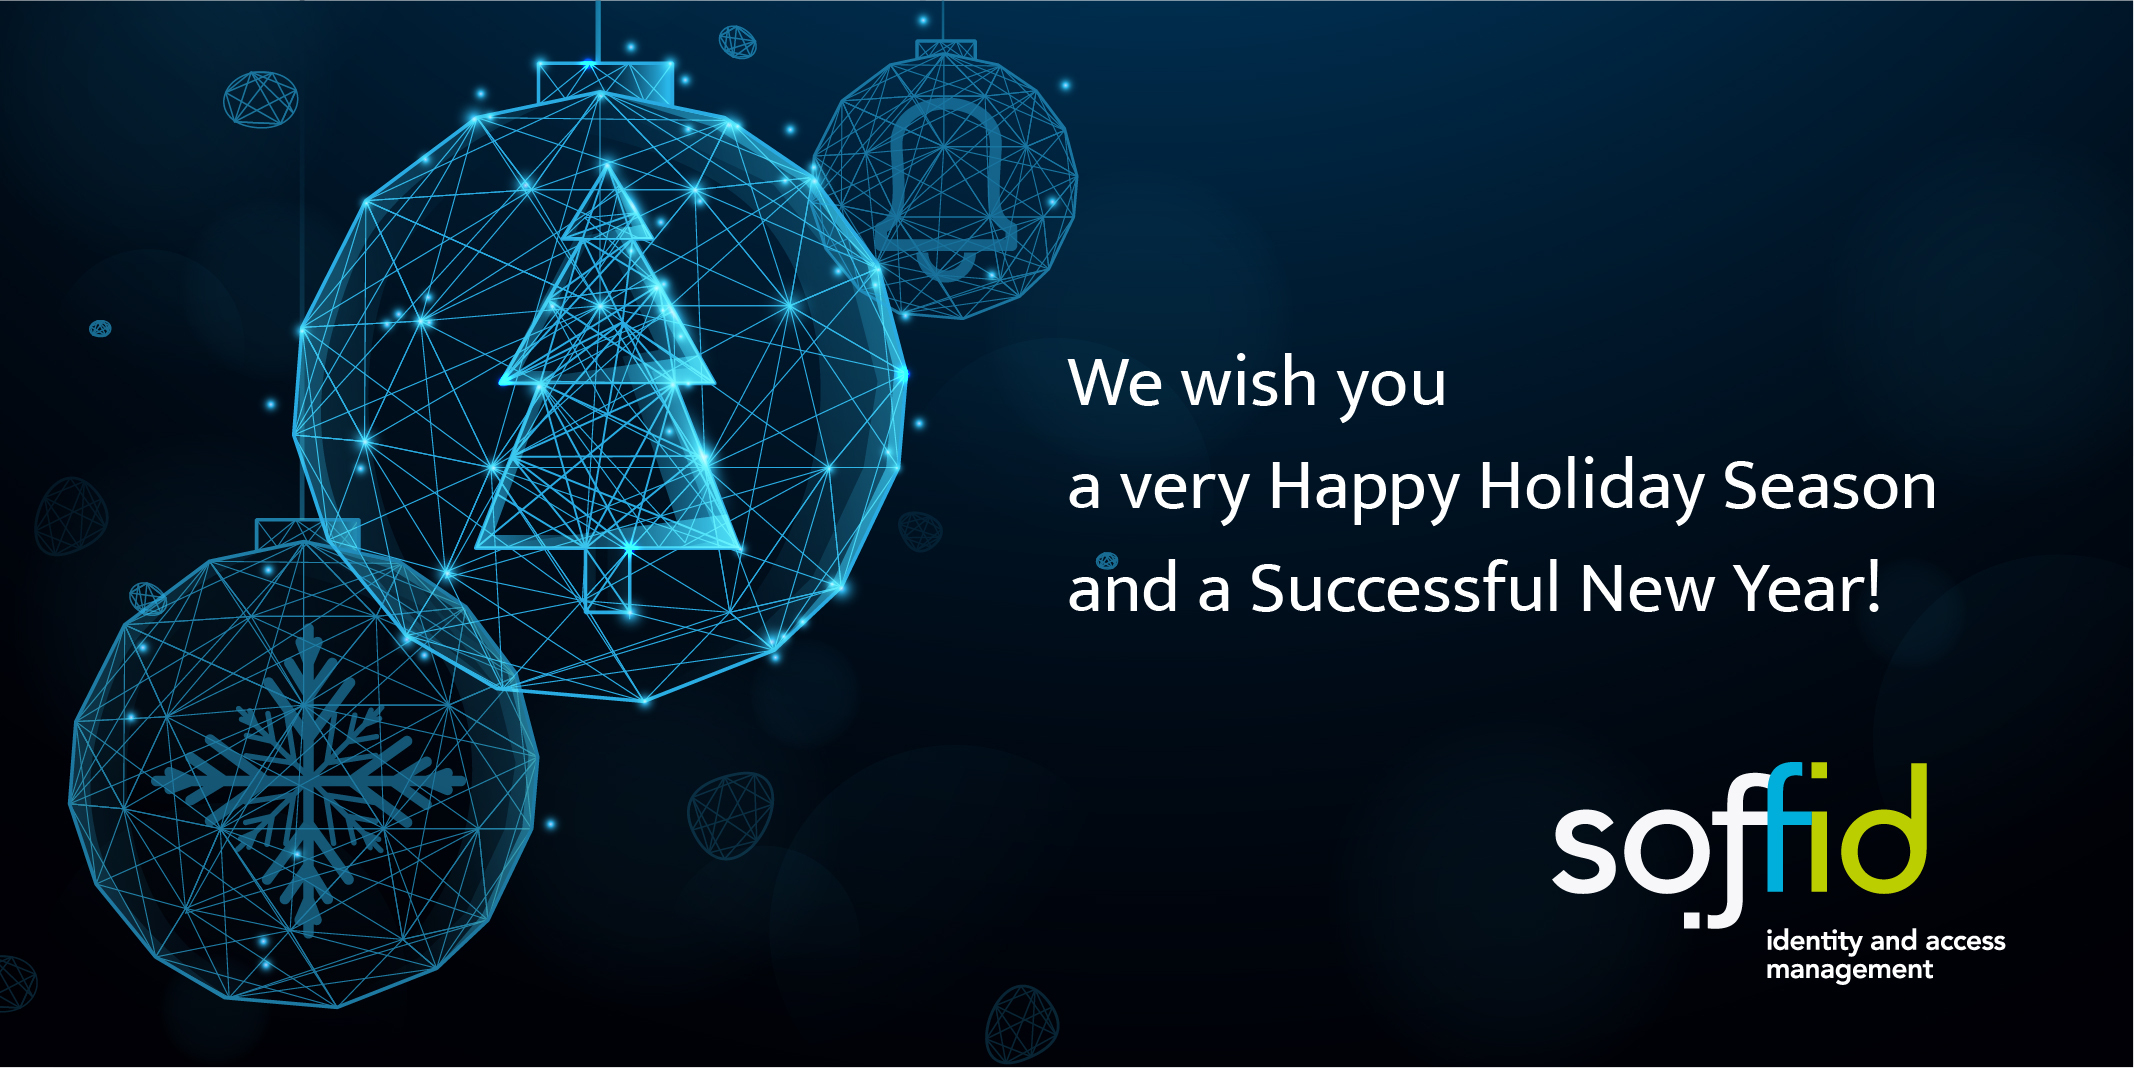 Happy Holidays to you and your family!